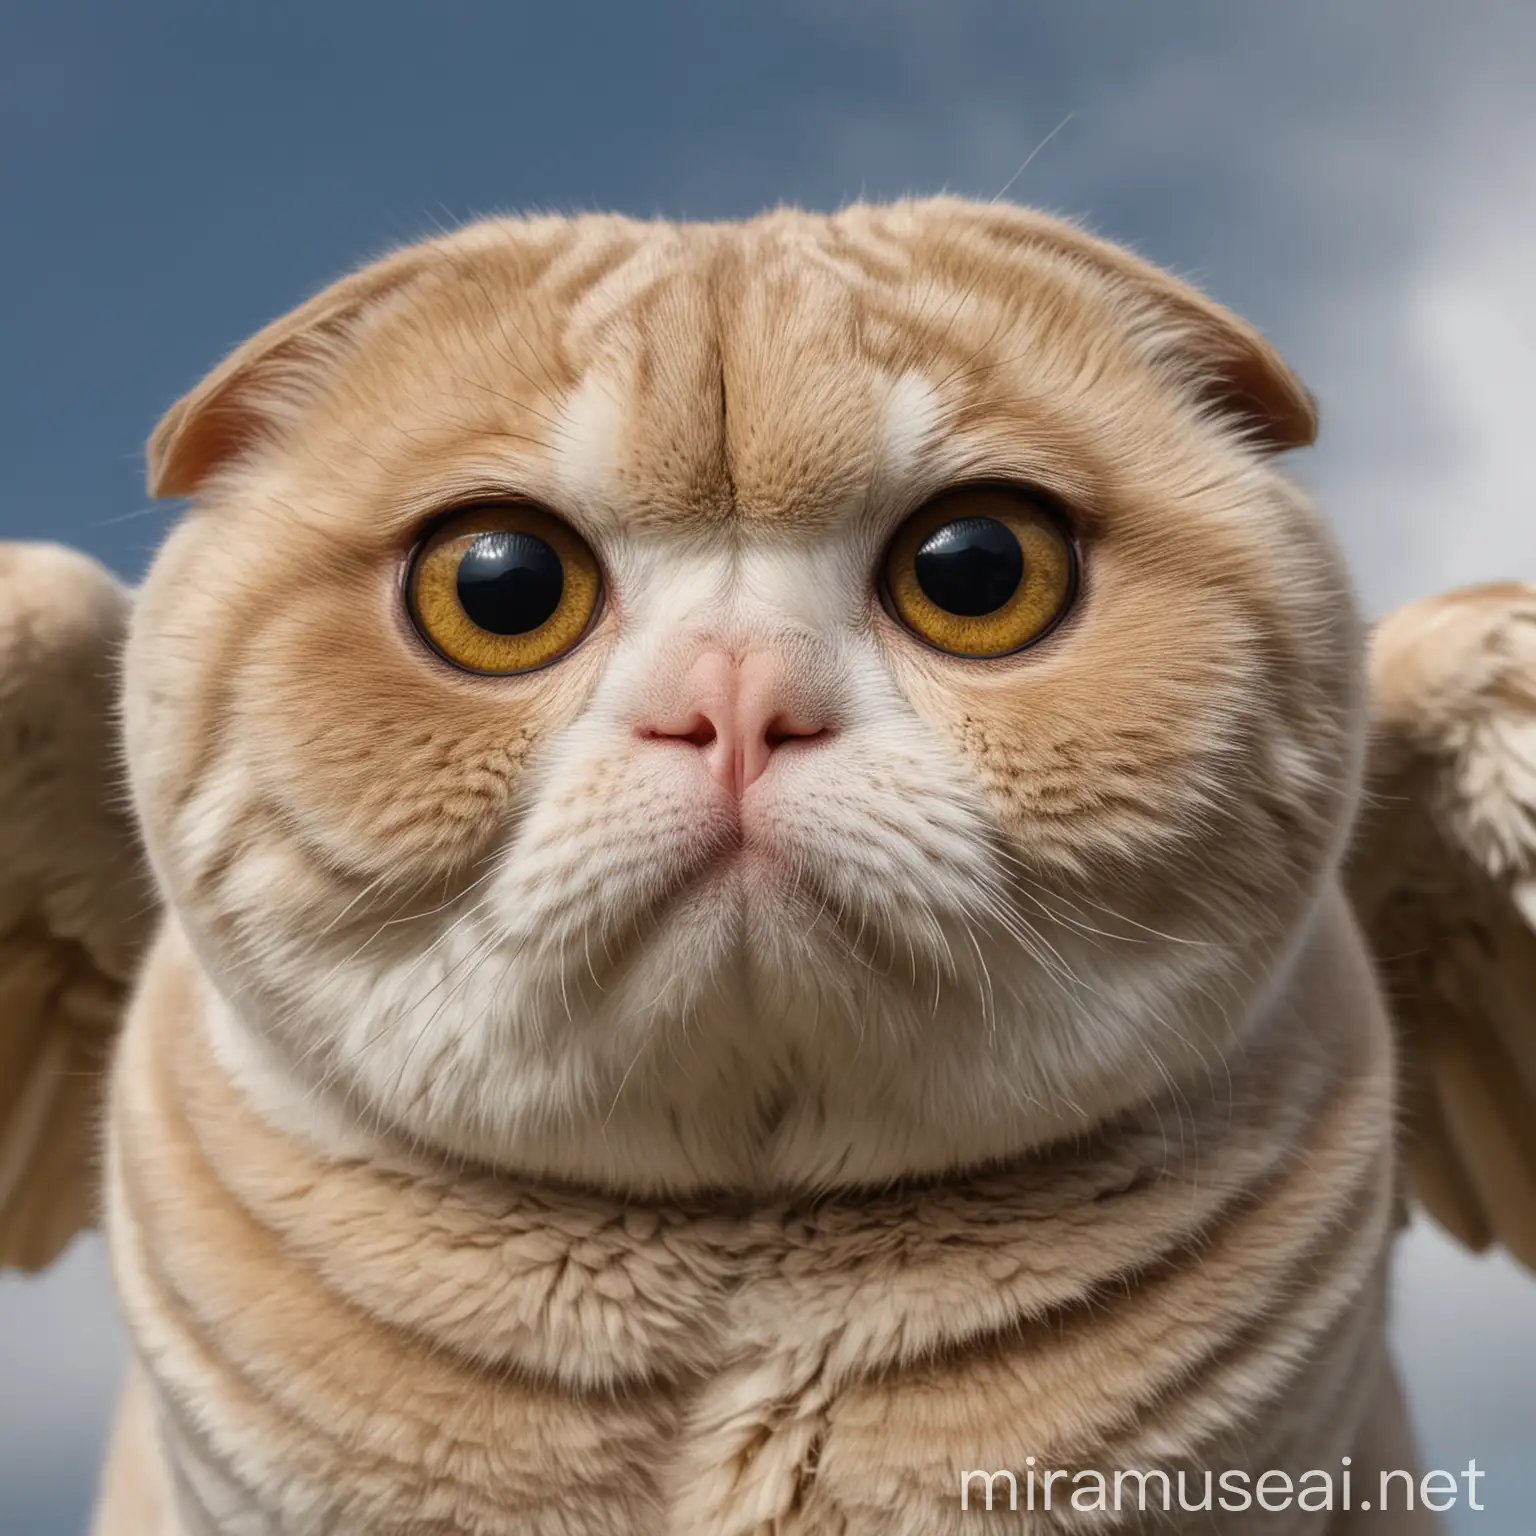 An Scottishfold with a big eyes and eliptic face and desent weight with a wings and glorious photo, looking from the sky to me